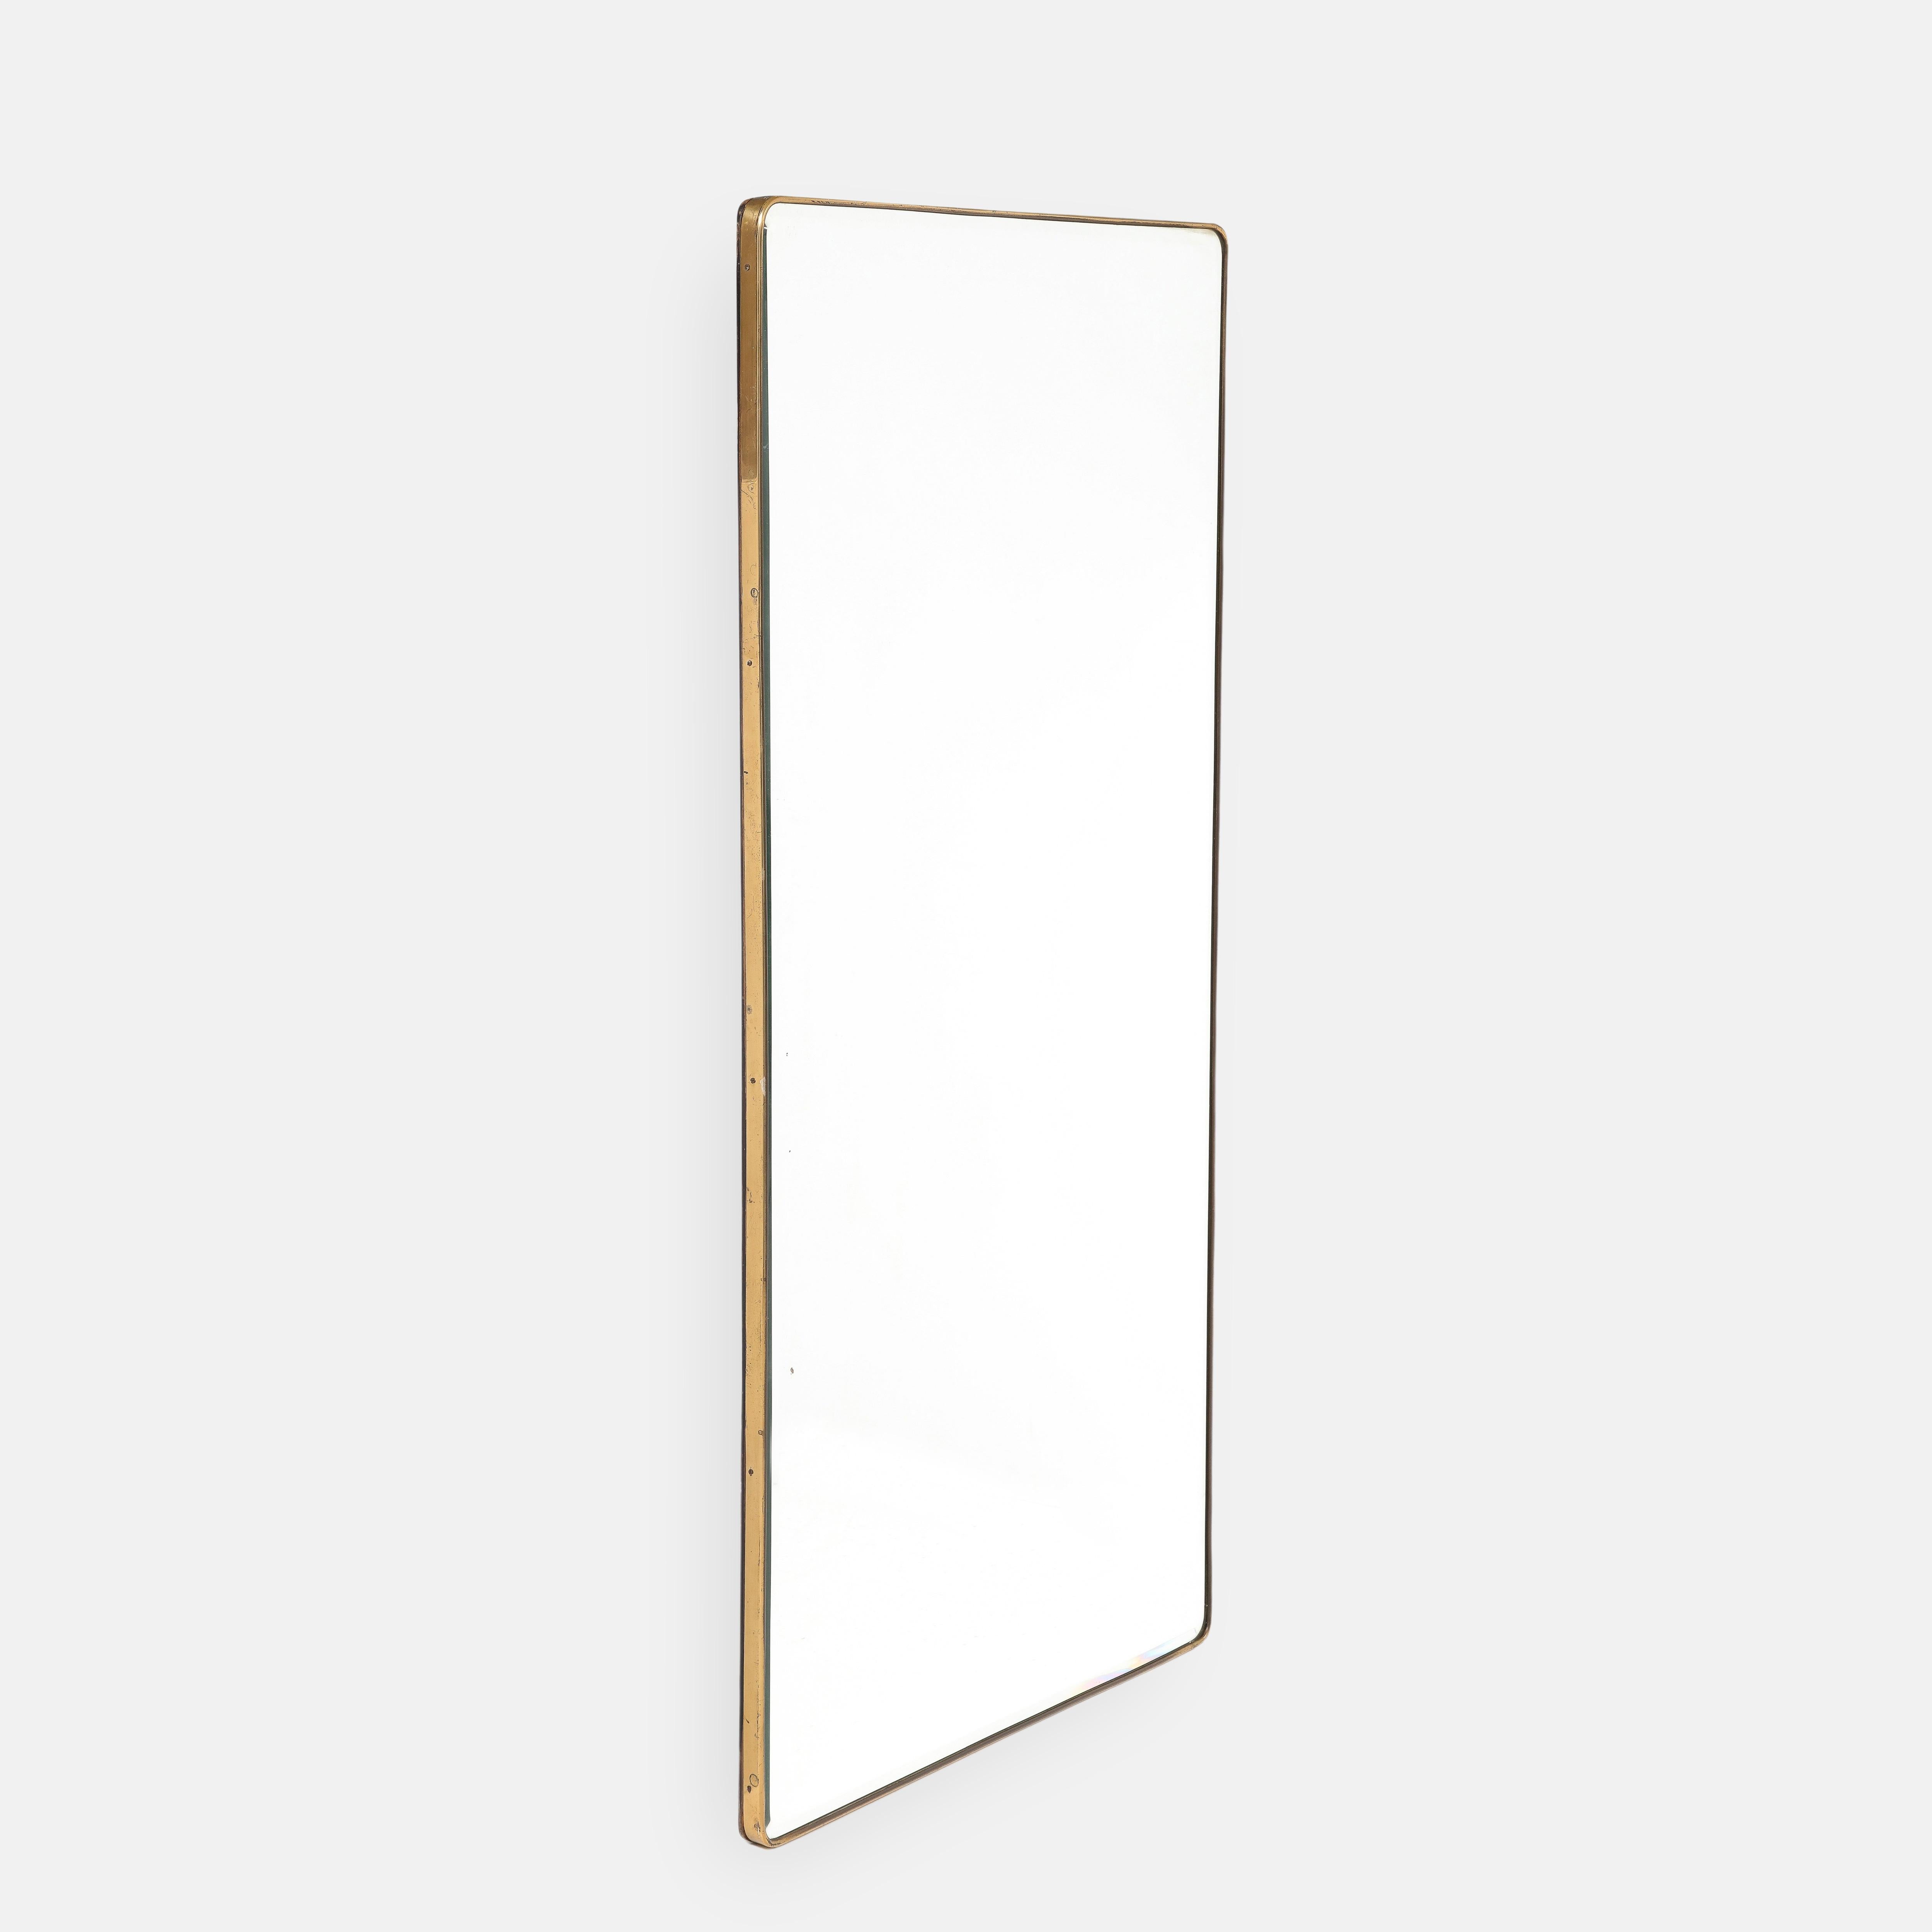 1950s Italian modernist grand scale brass wall mirror with gently rounded corners and bevelled mirrored glass. This rectangular mirror is versatile and can be hung either vertically or horizontally. This large period mirror is well constructed with